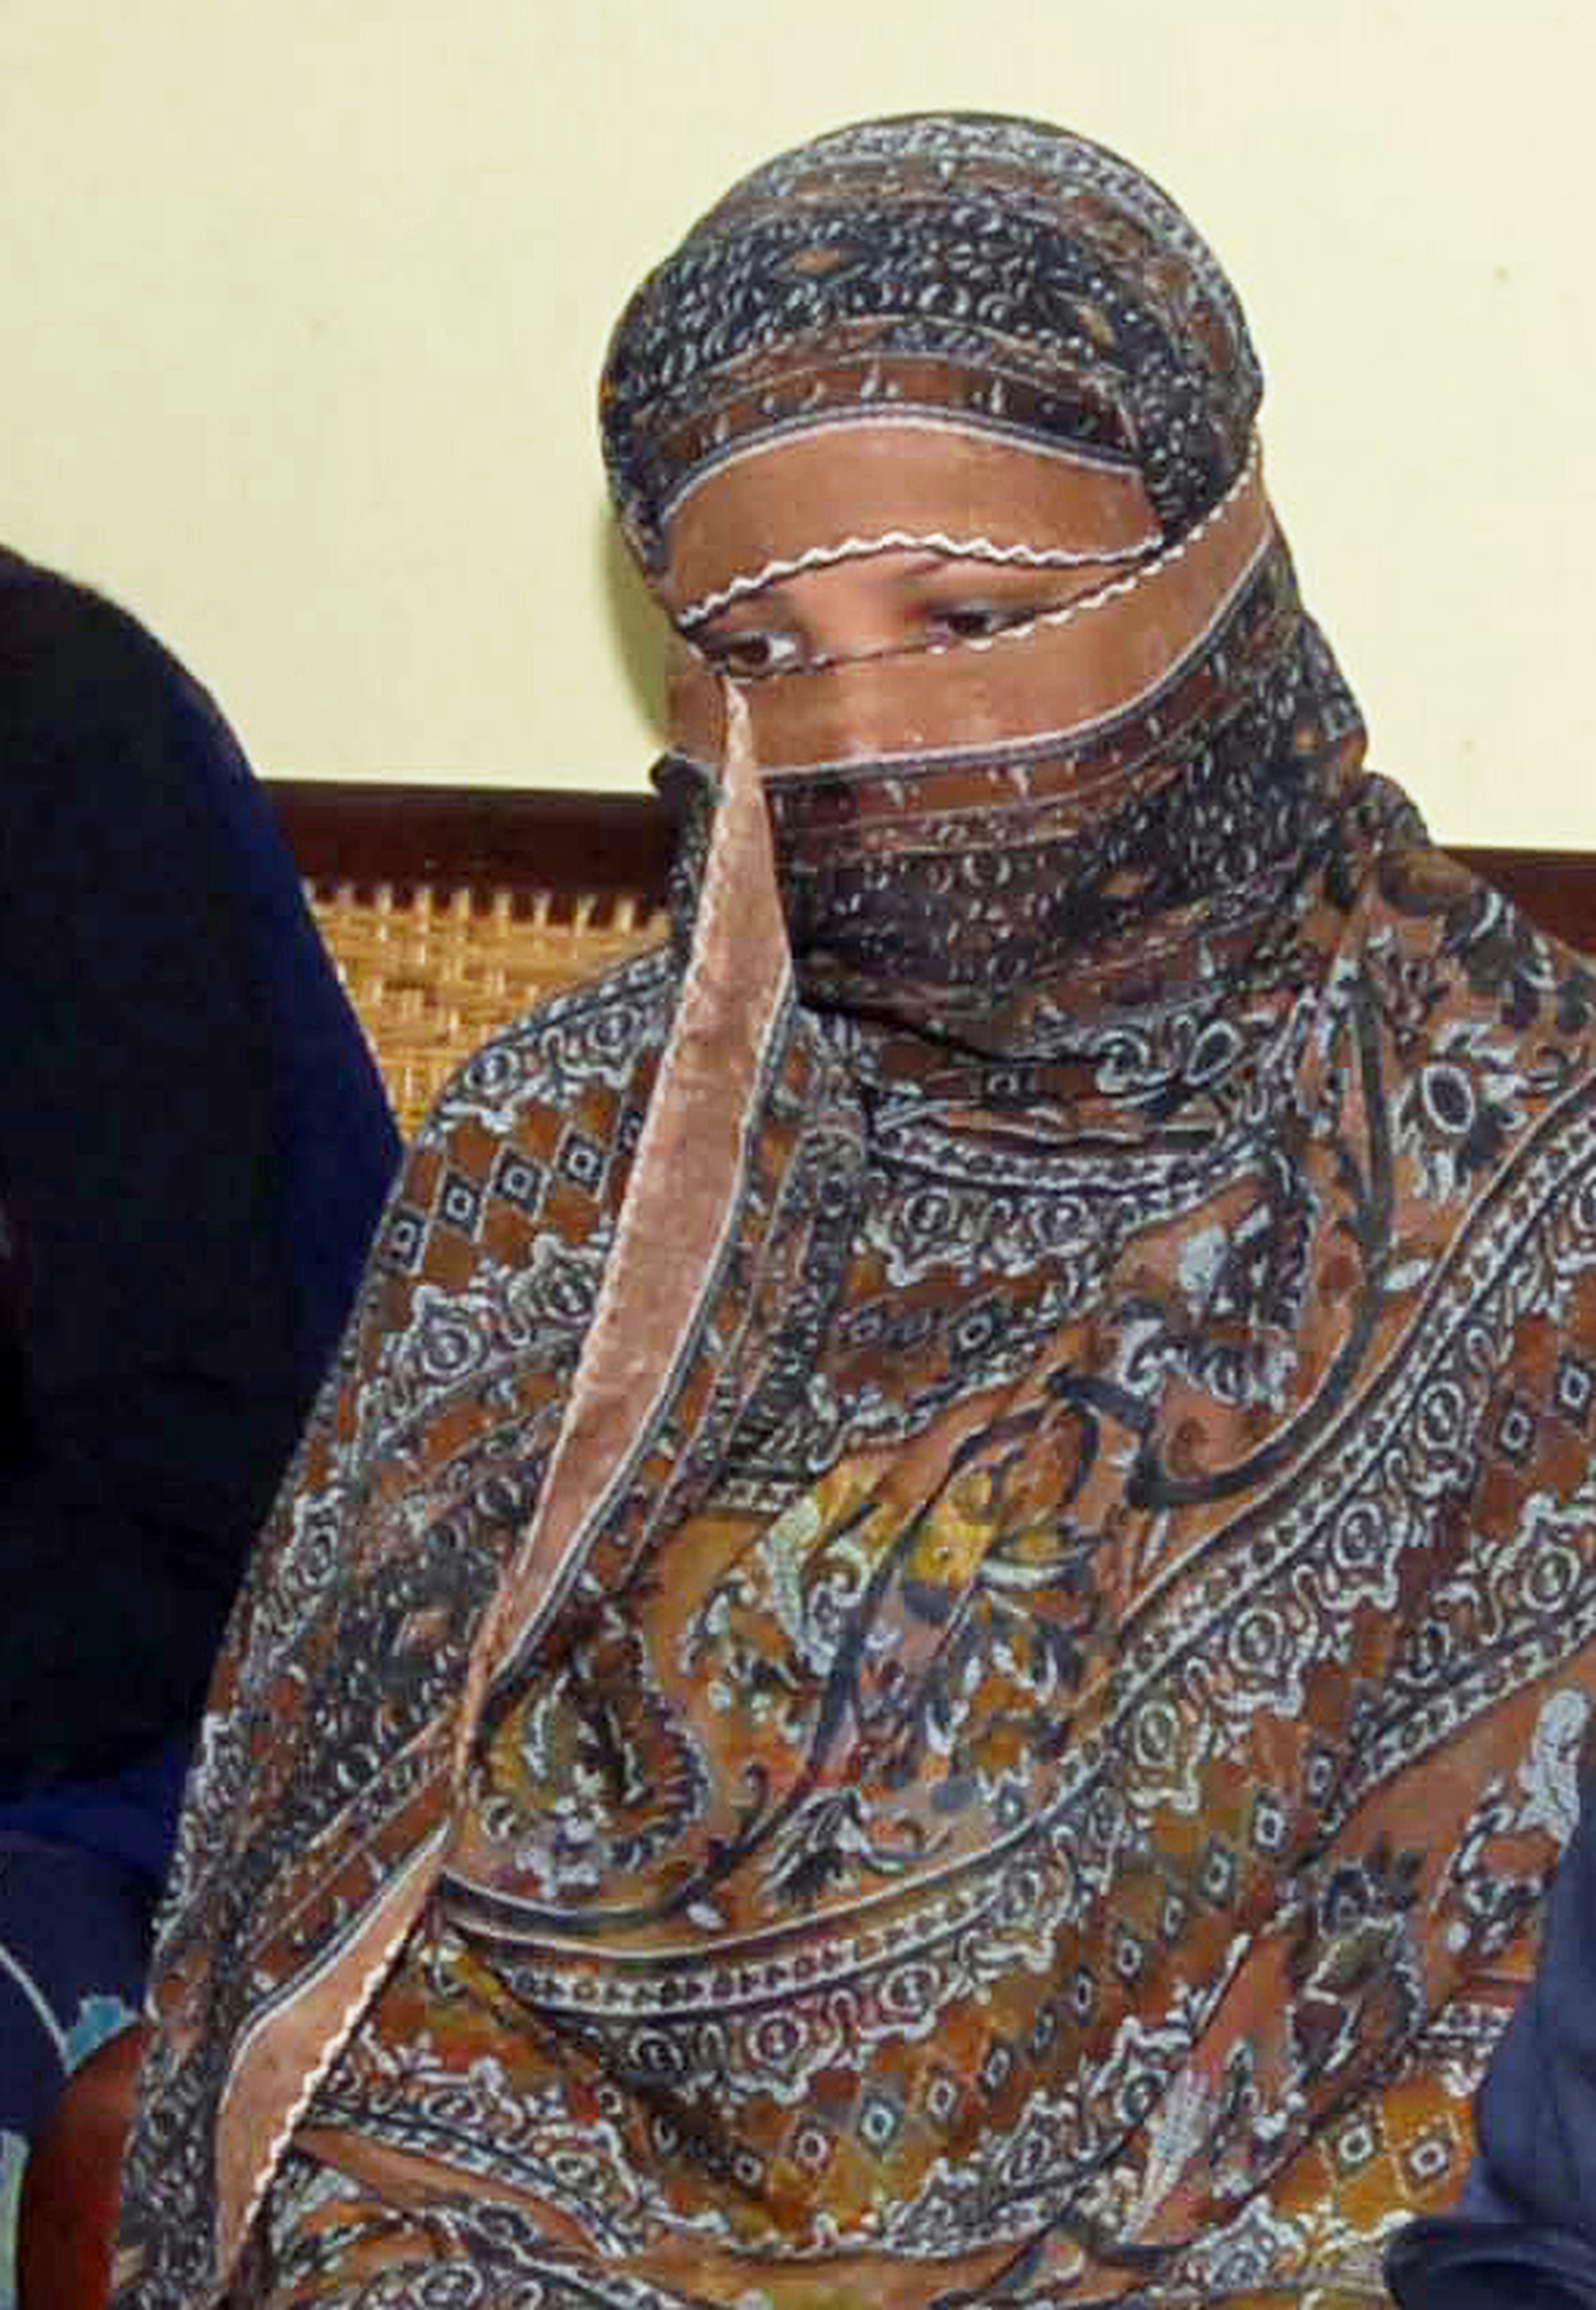 Asia Bibi, seen in this Nov. 20, 2010, file photo, was sentenced to death in 2010 for insulting the Prophet Muhammad, a charge she denies. Her father, Soran Masih, has been denied visitation rights by jail authorities. (CNS/Punjab Governor House handout via EPA) 